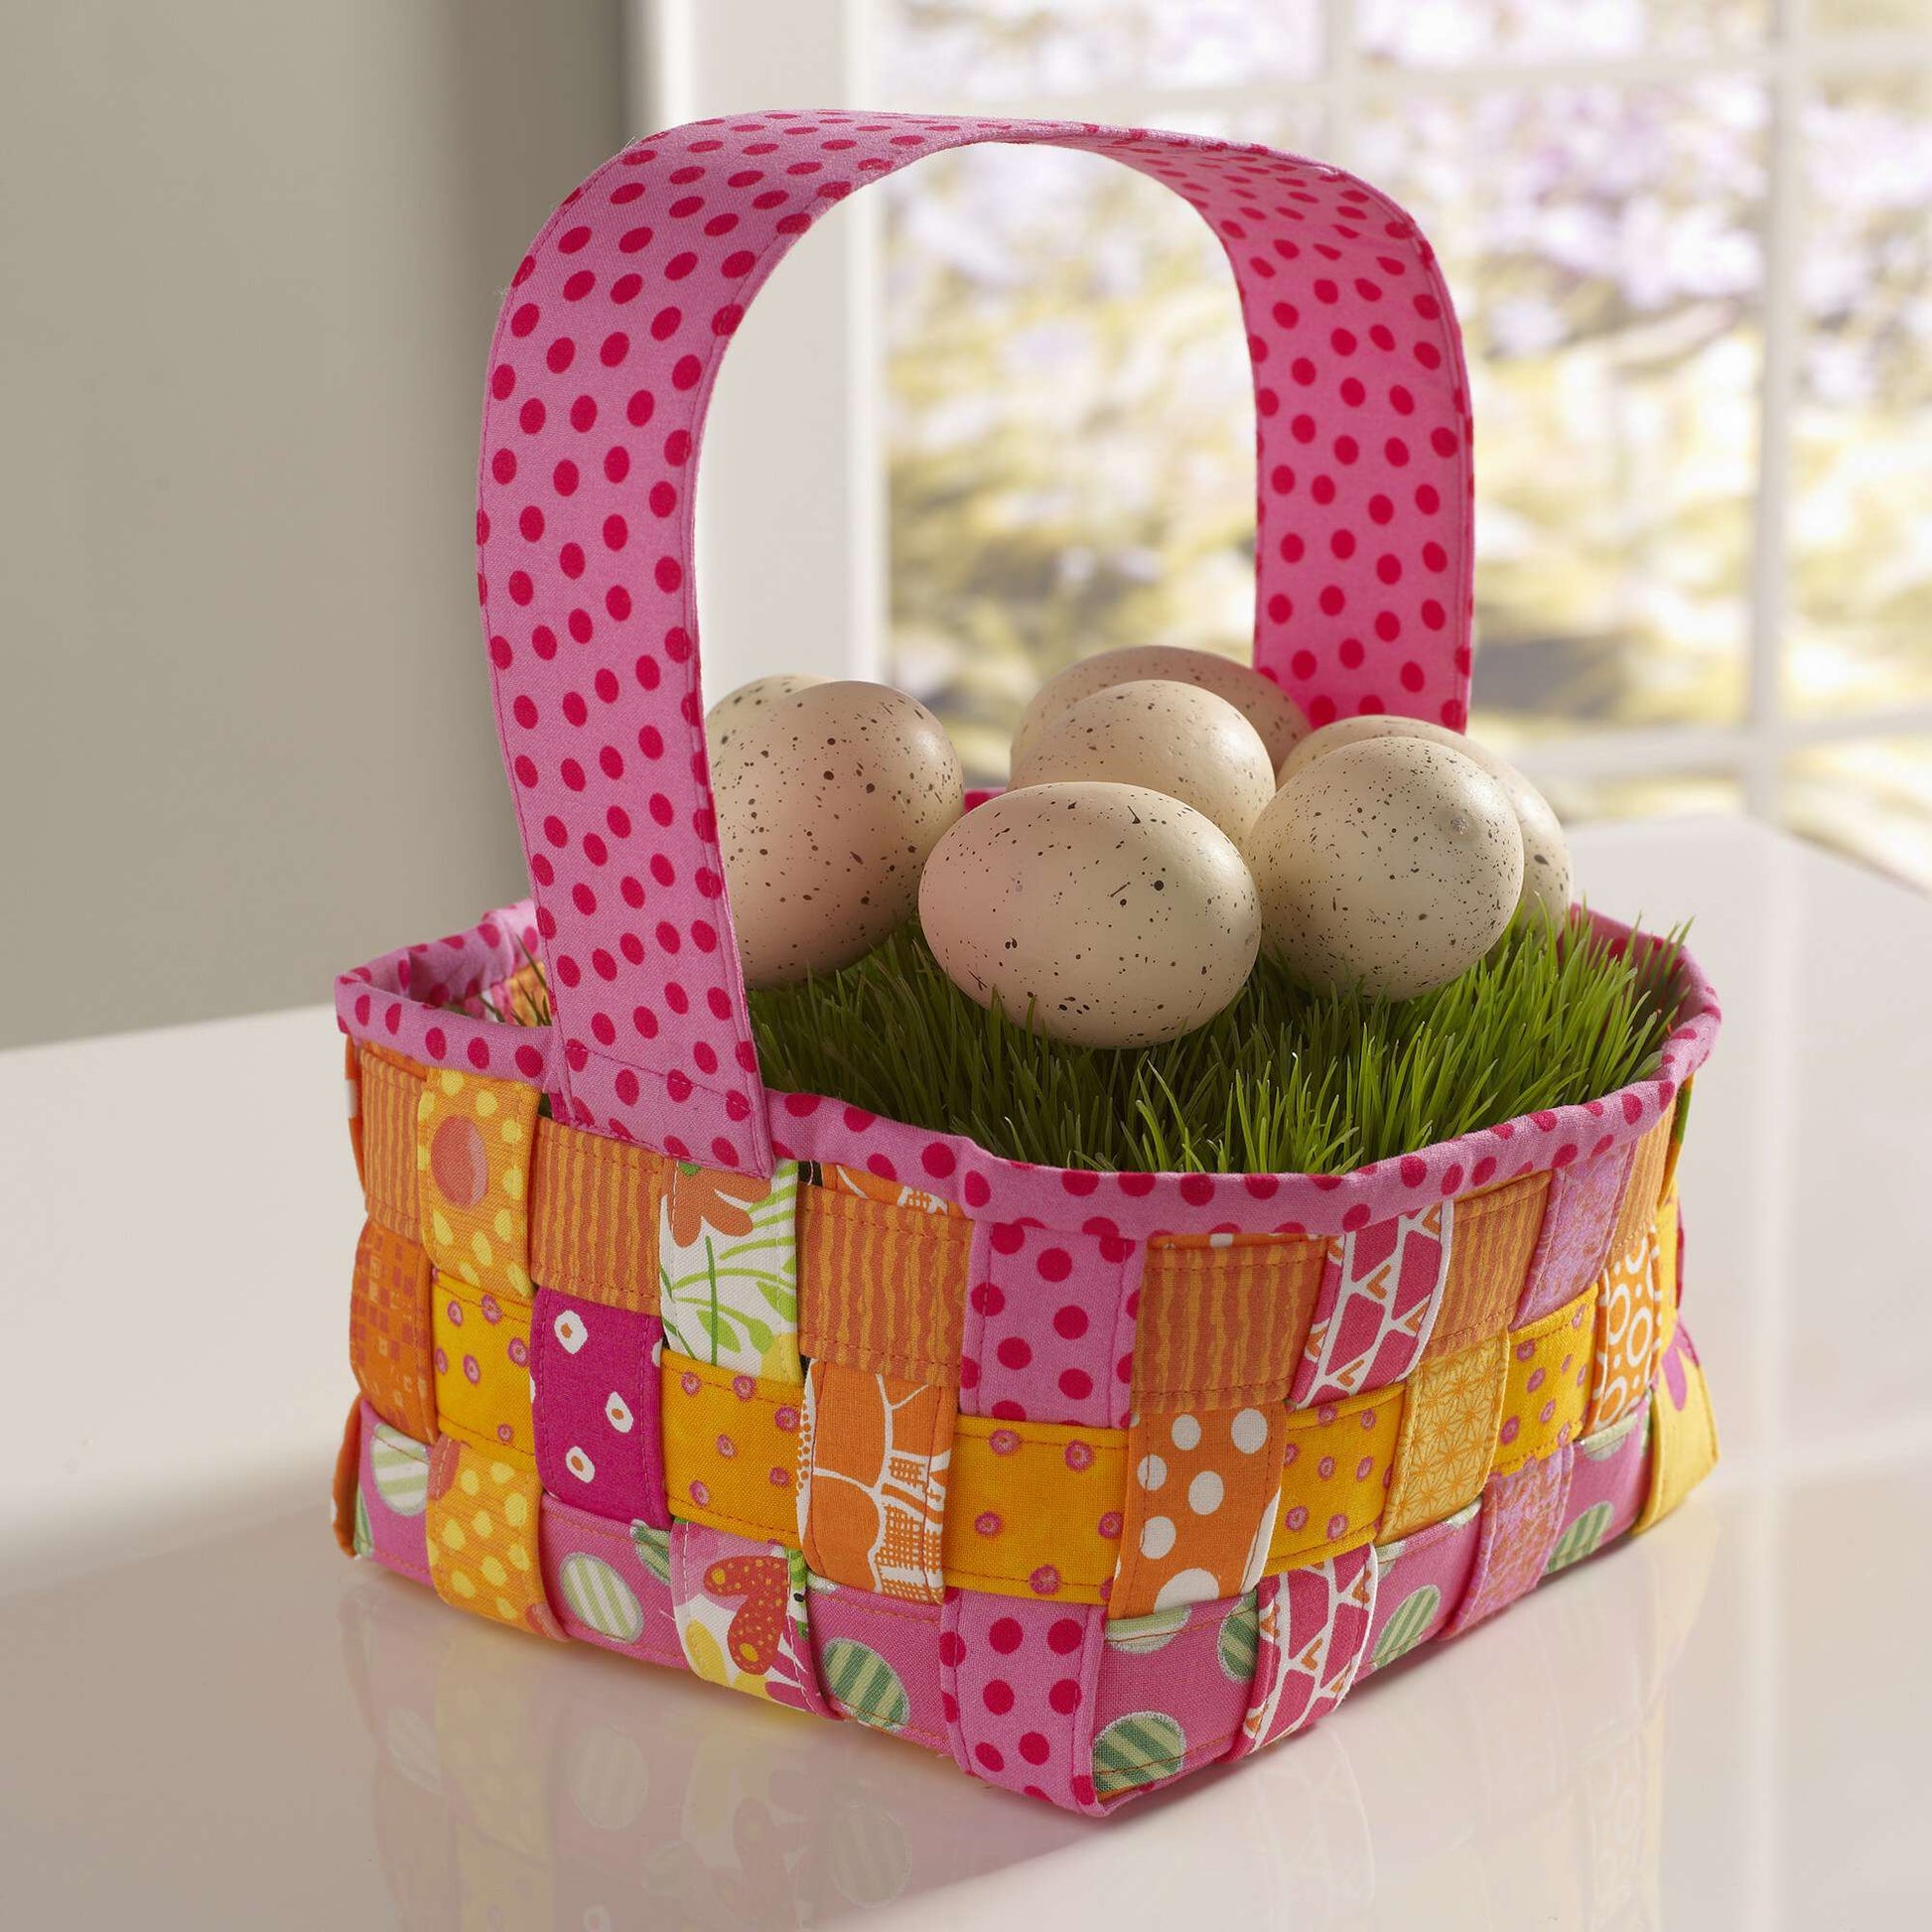 Free Coats & Clark Woven Easter Basket Sewing Pattern